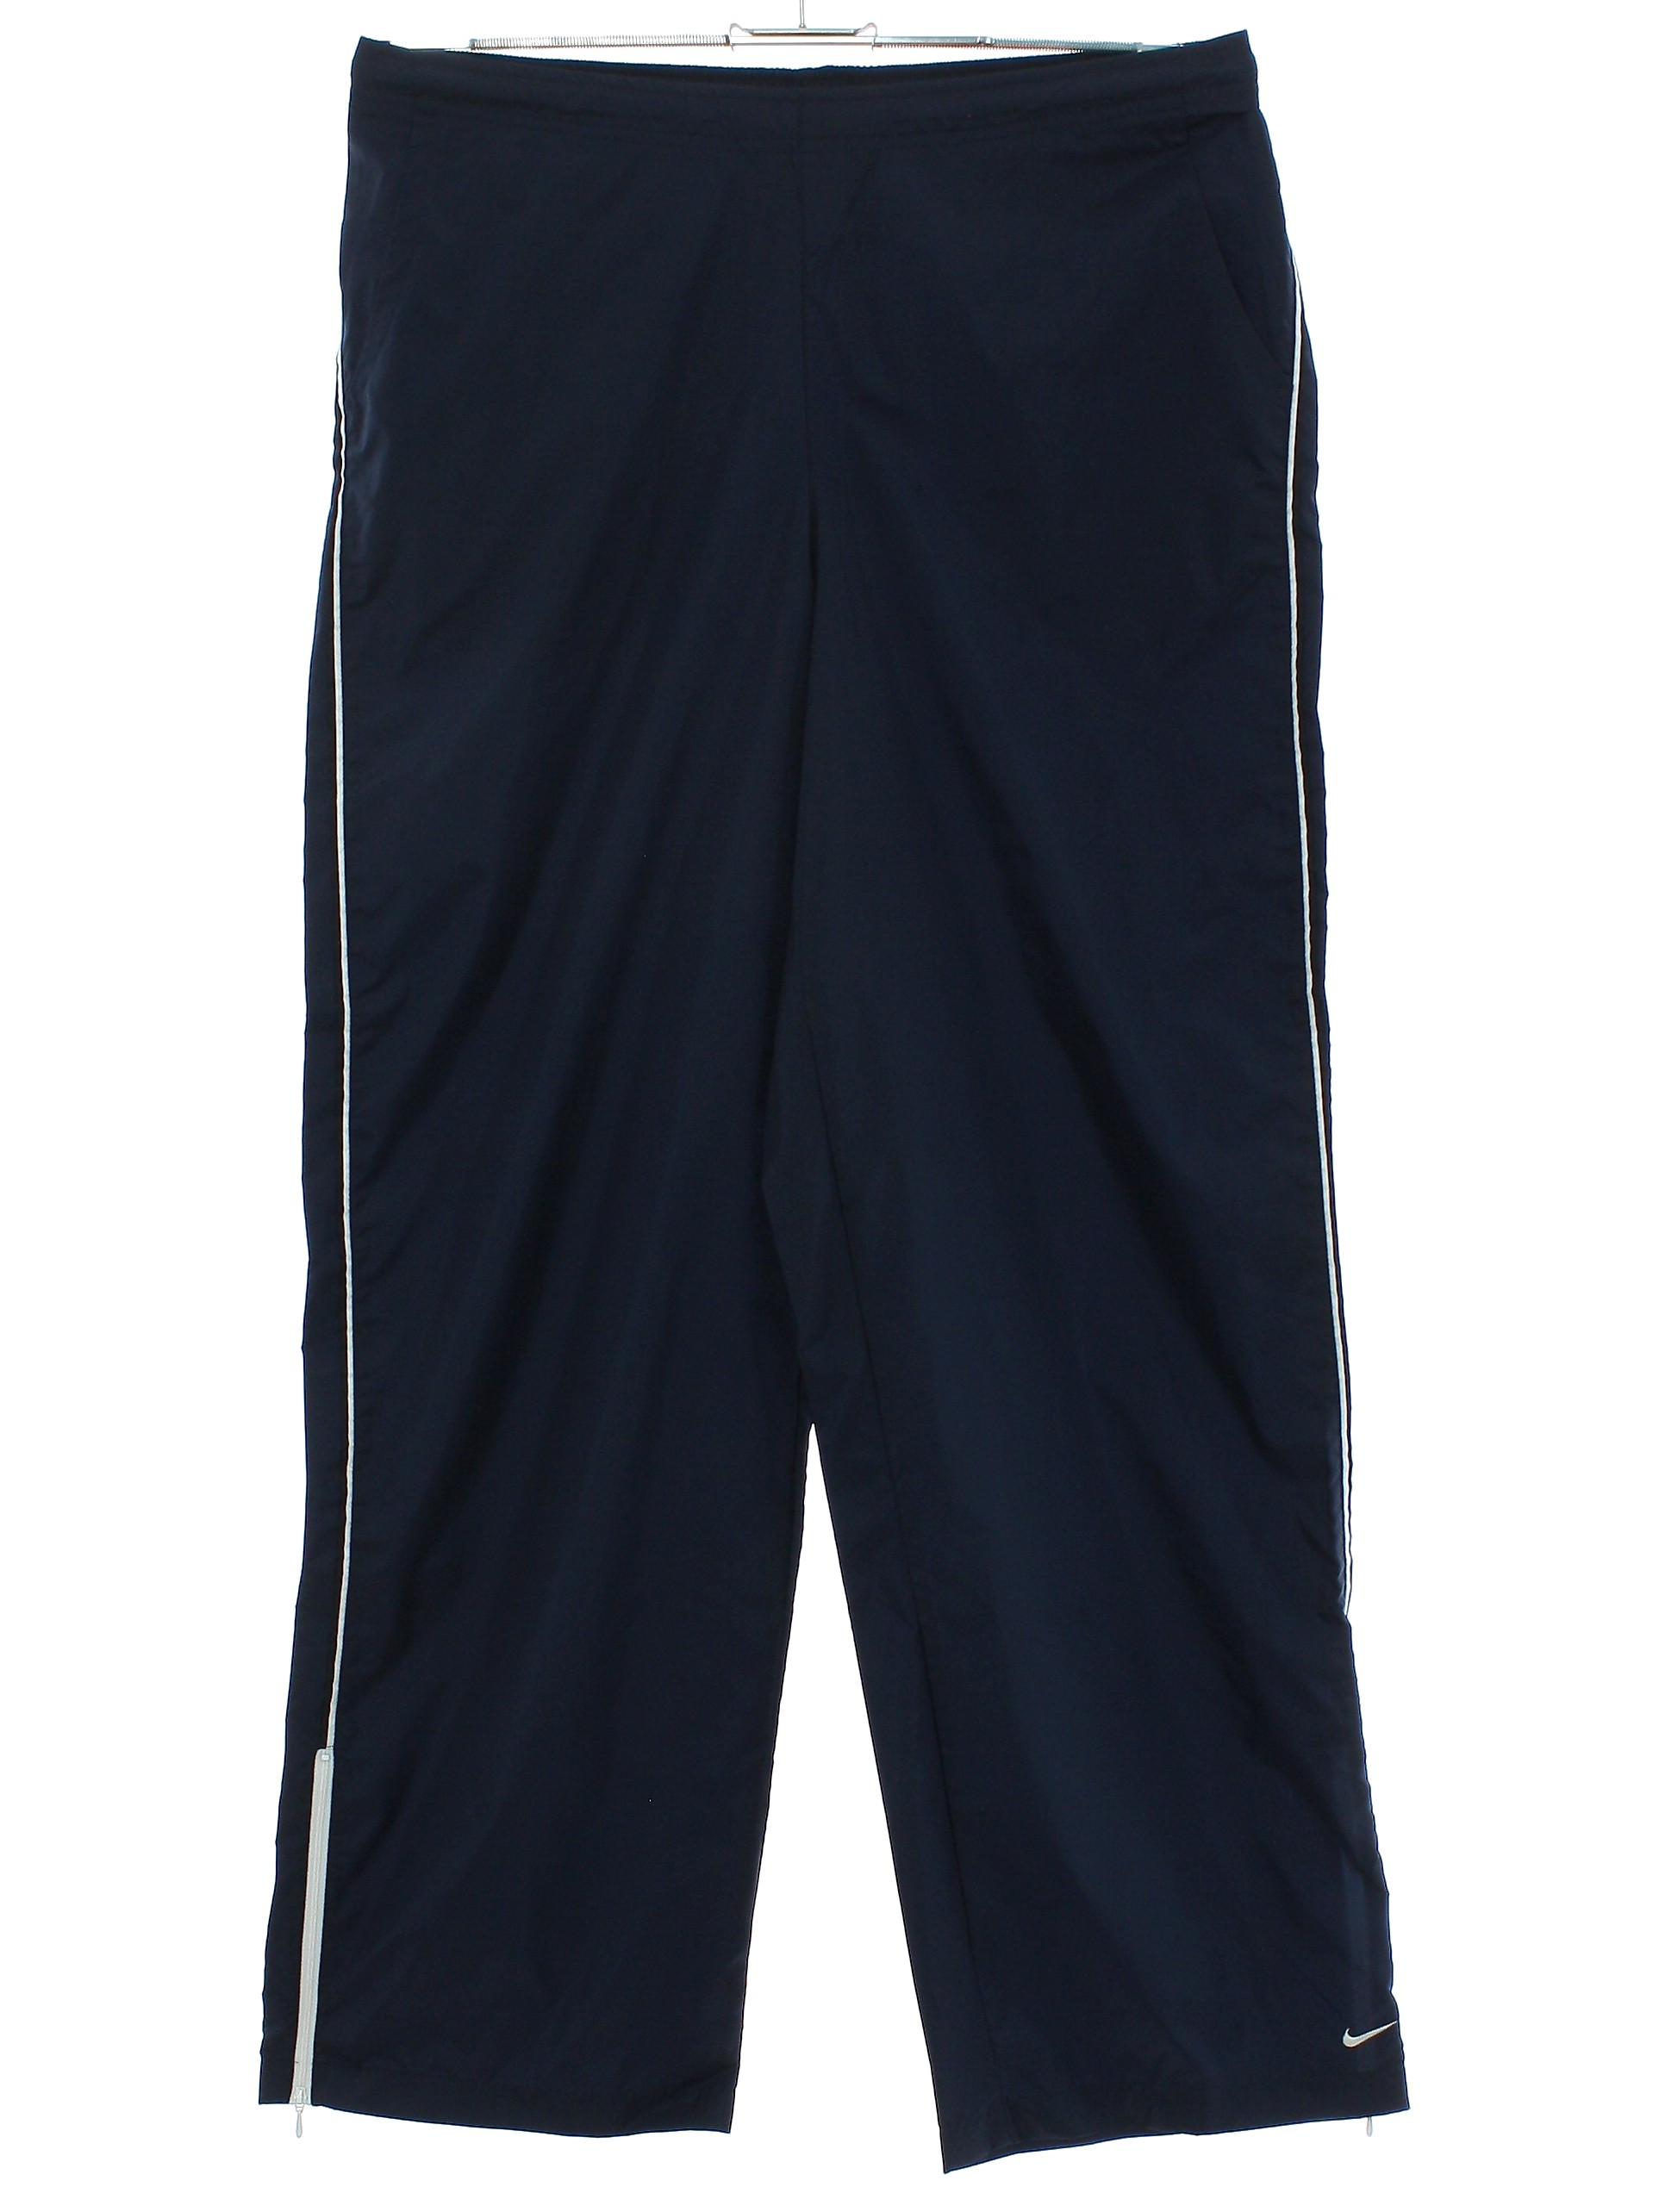 Pants: 90s (early 2000s) -Nike- Mens navy blue and white nylon taffeta wide  leg running pants with elasticized waist with drawstring, 2 side pocket and  zippered back pocket, short zippers at cuffs